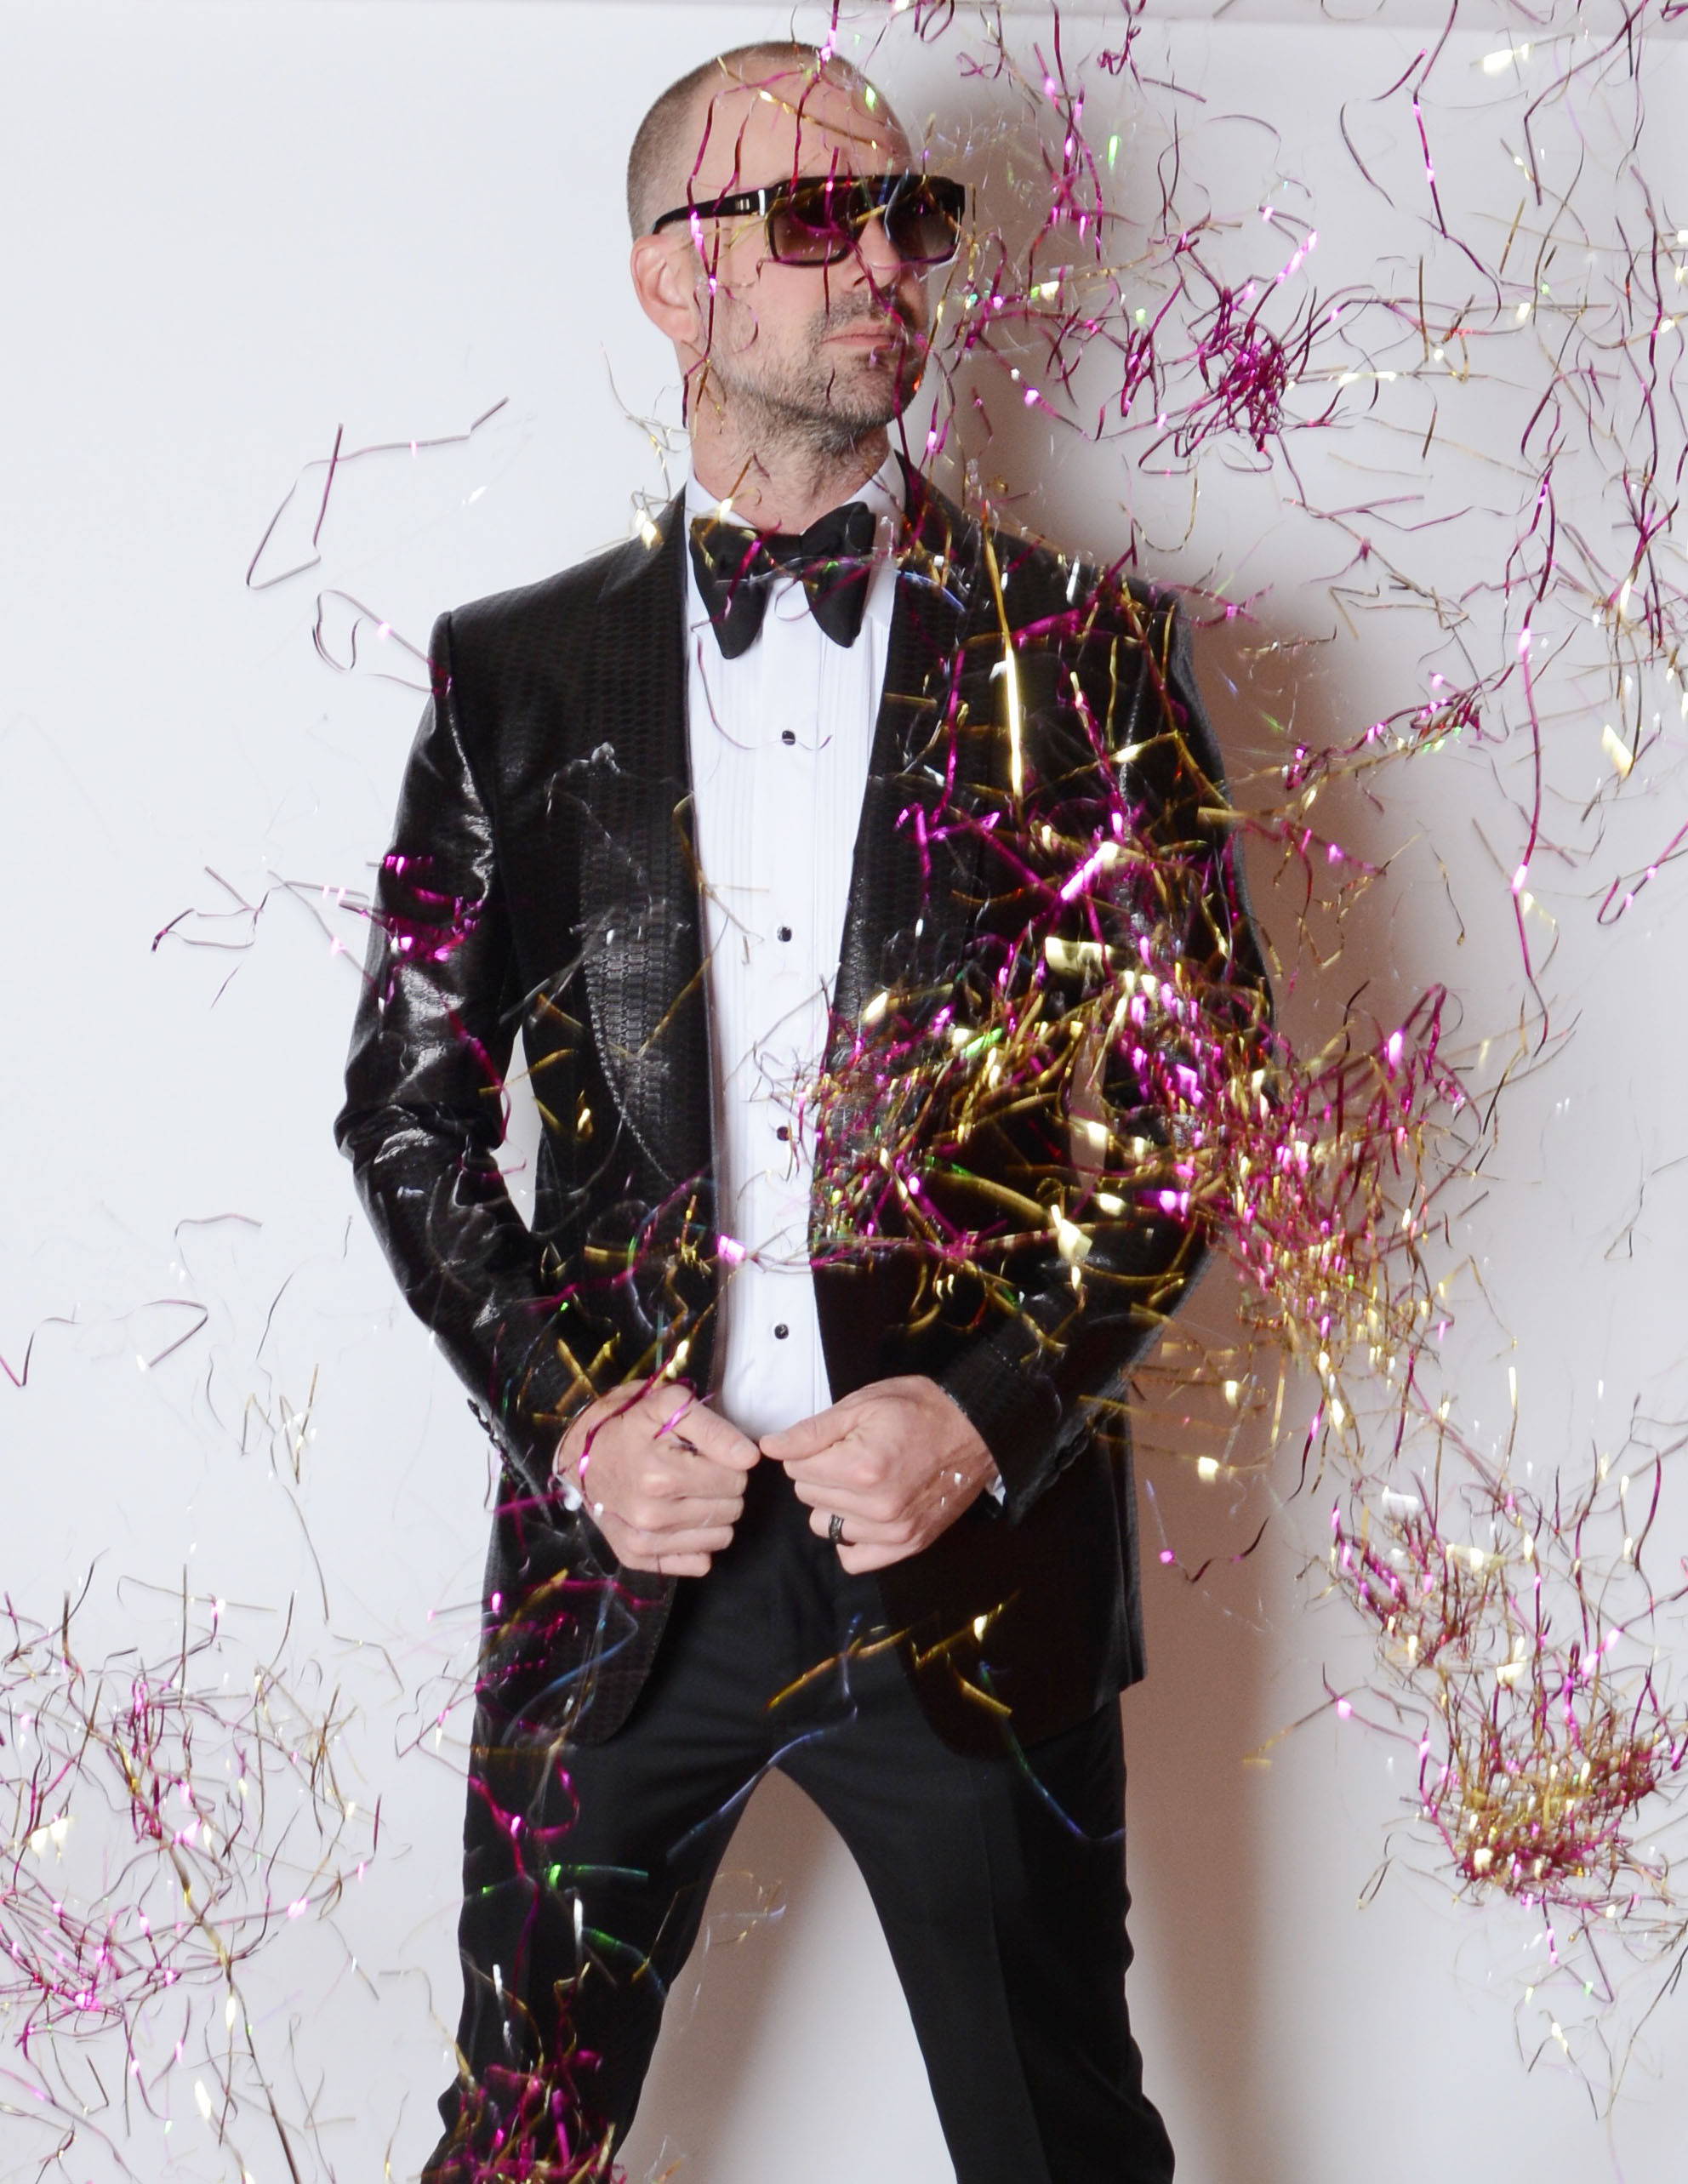 Dr. Barczak in a black tux and sunglasses with confetti dropping down on him